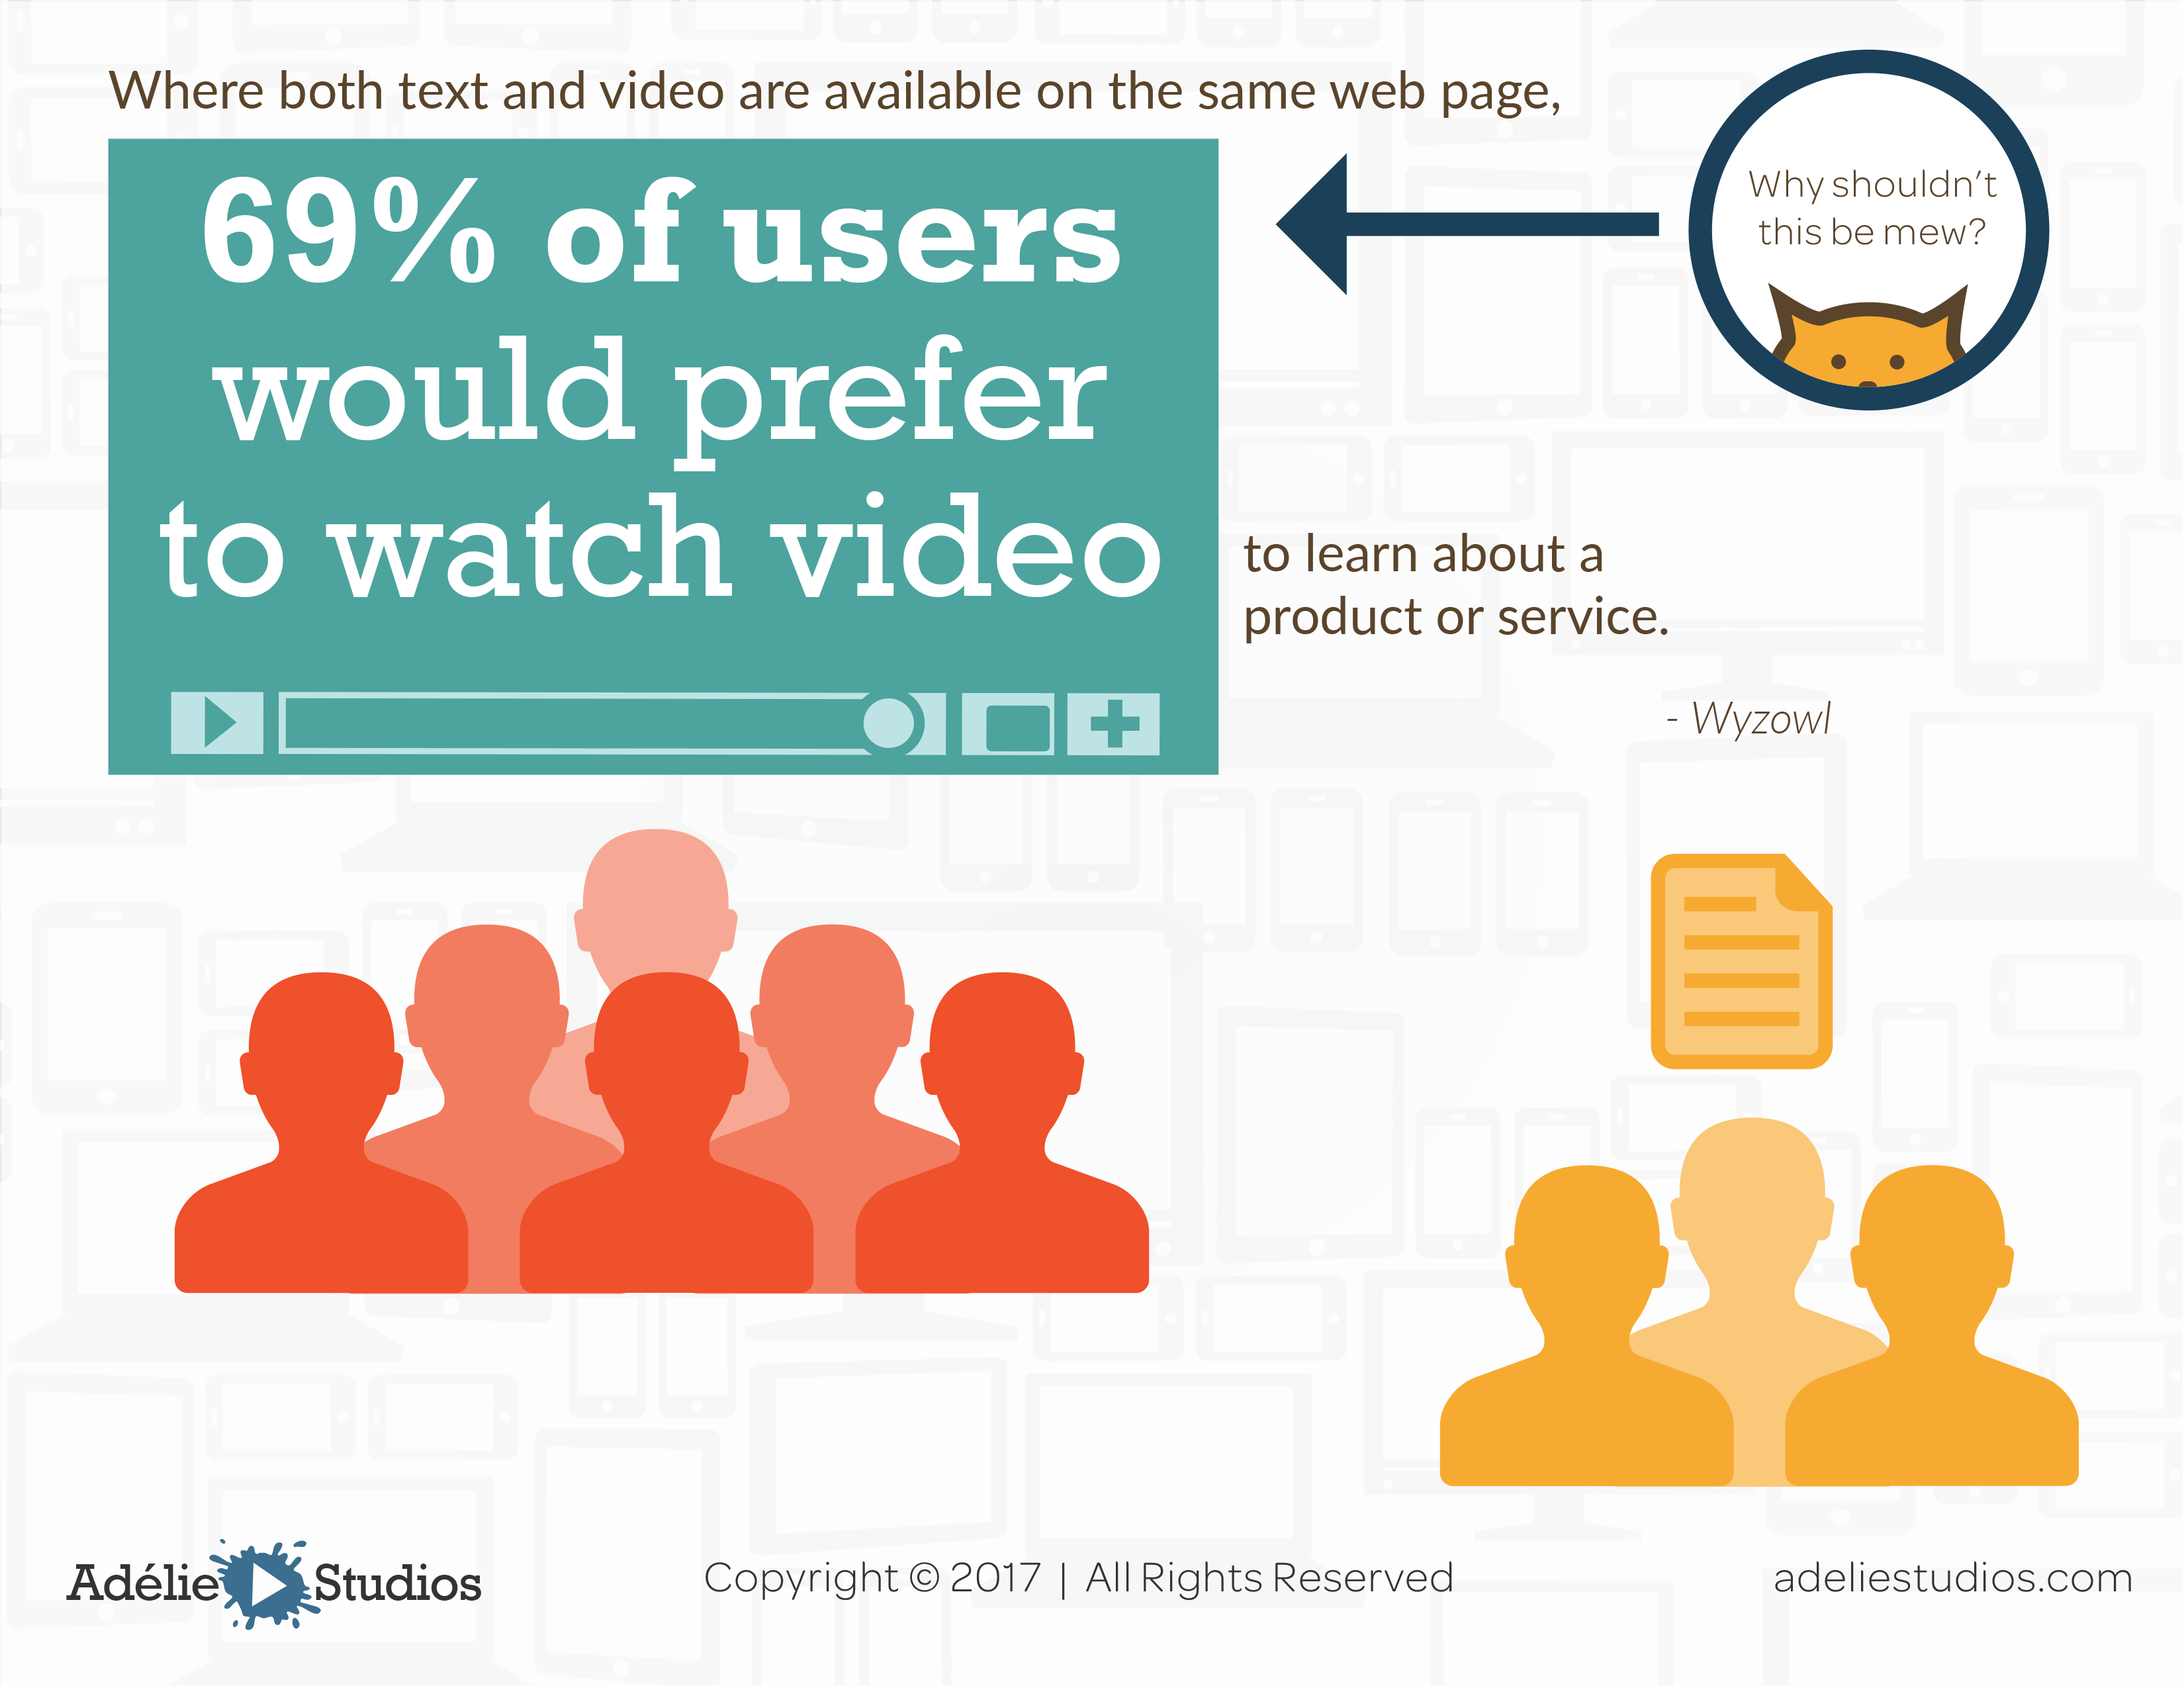 69% of users prefer video